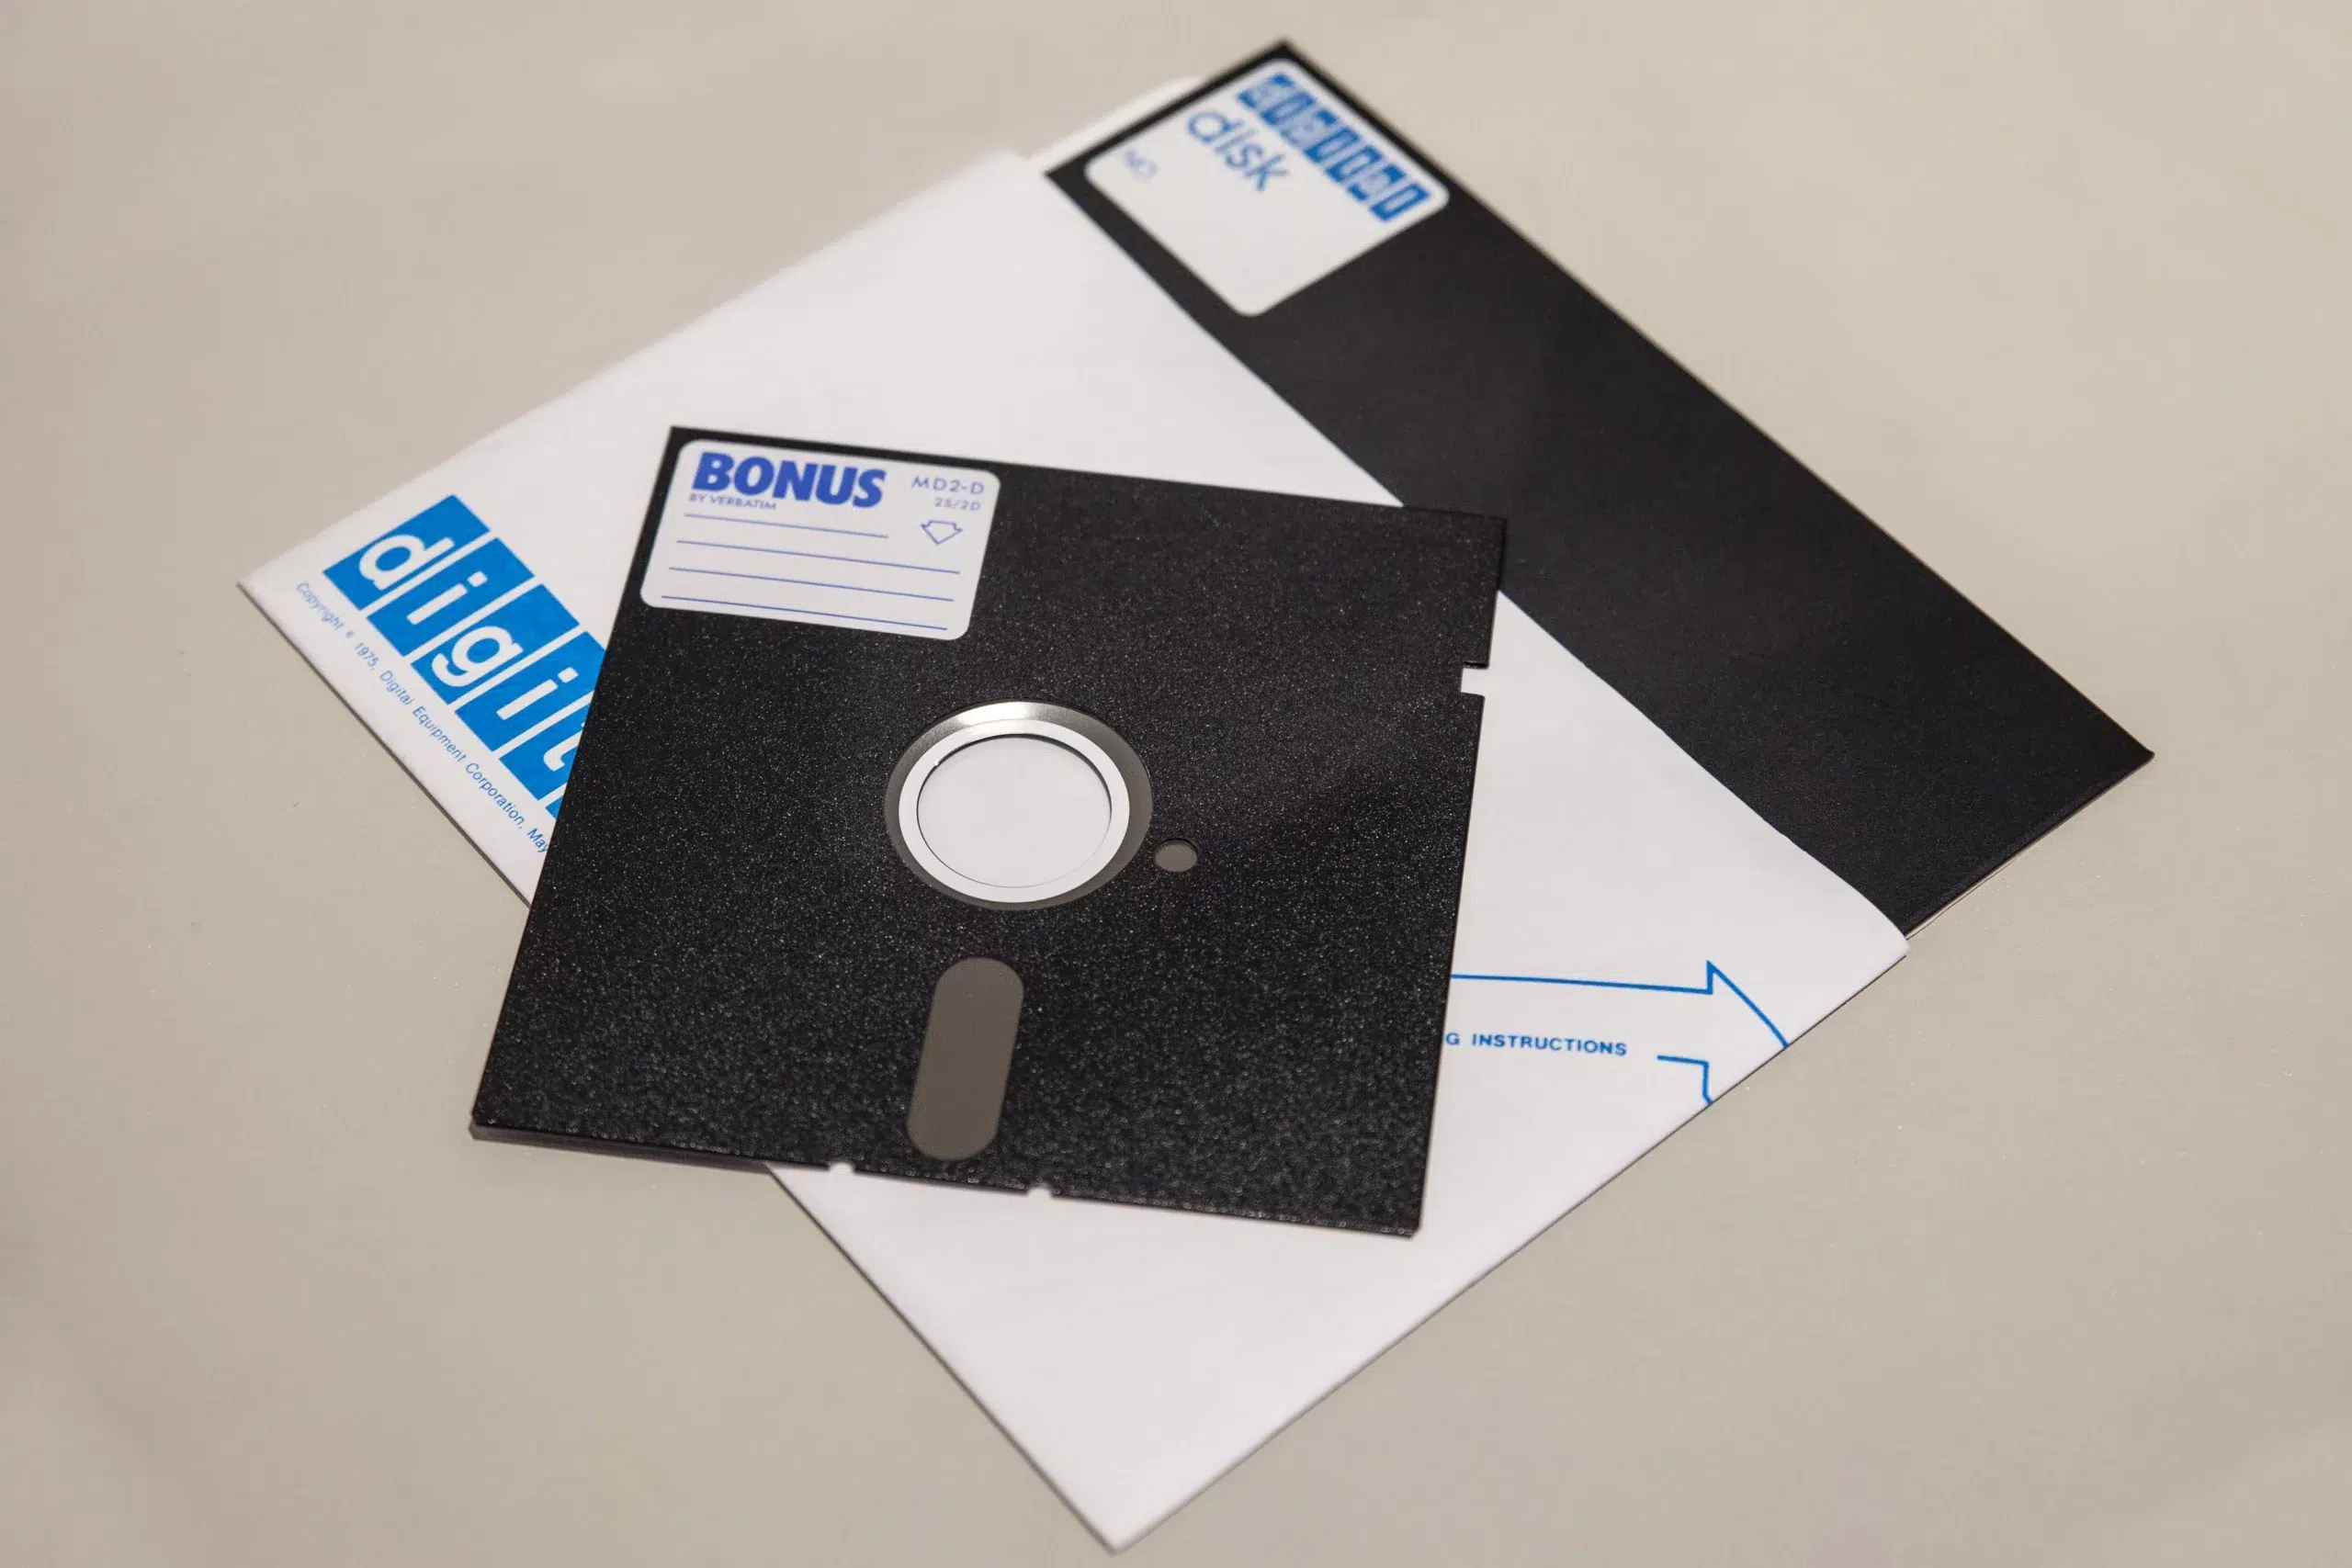 Floppy disk on top of another floppy disk inside its packet